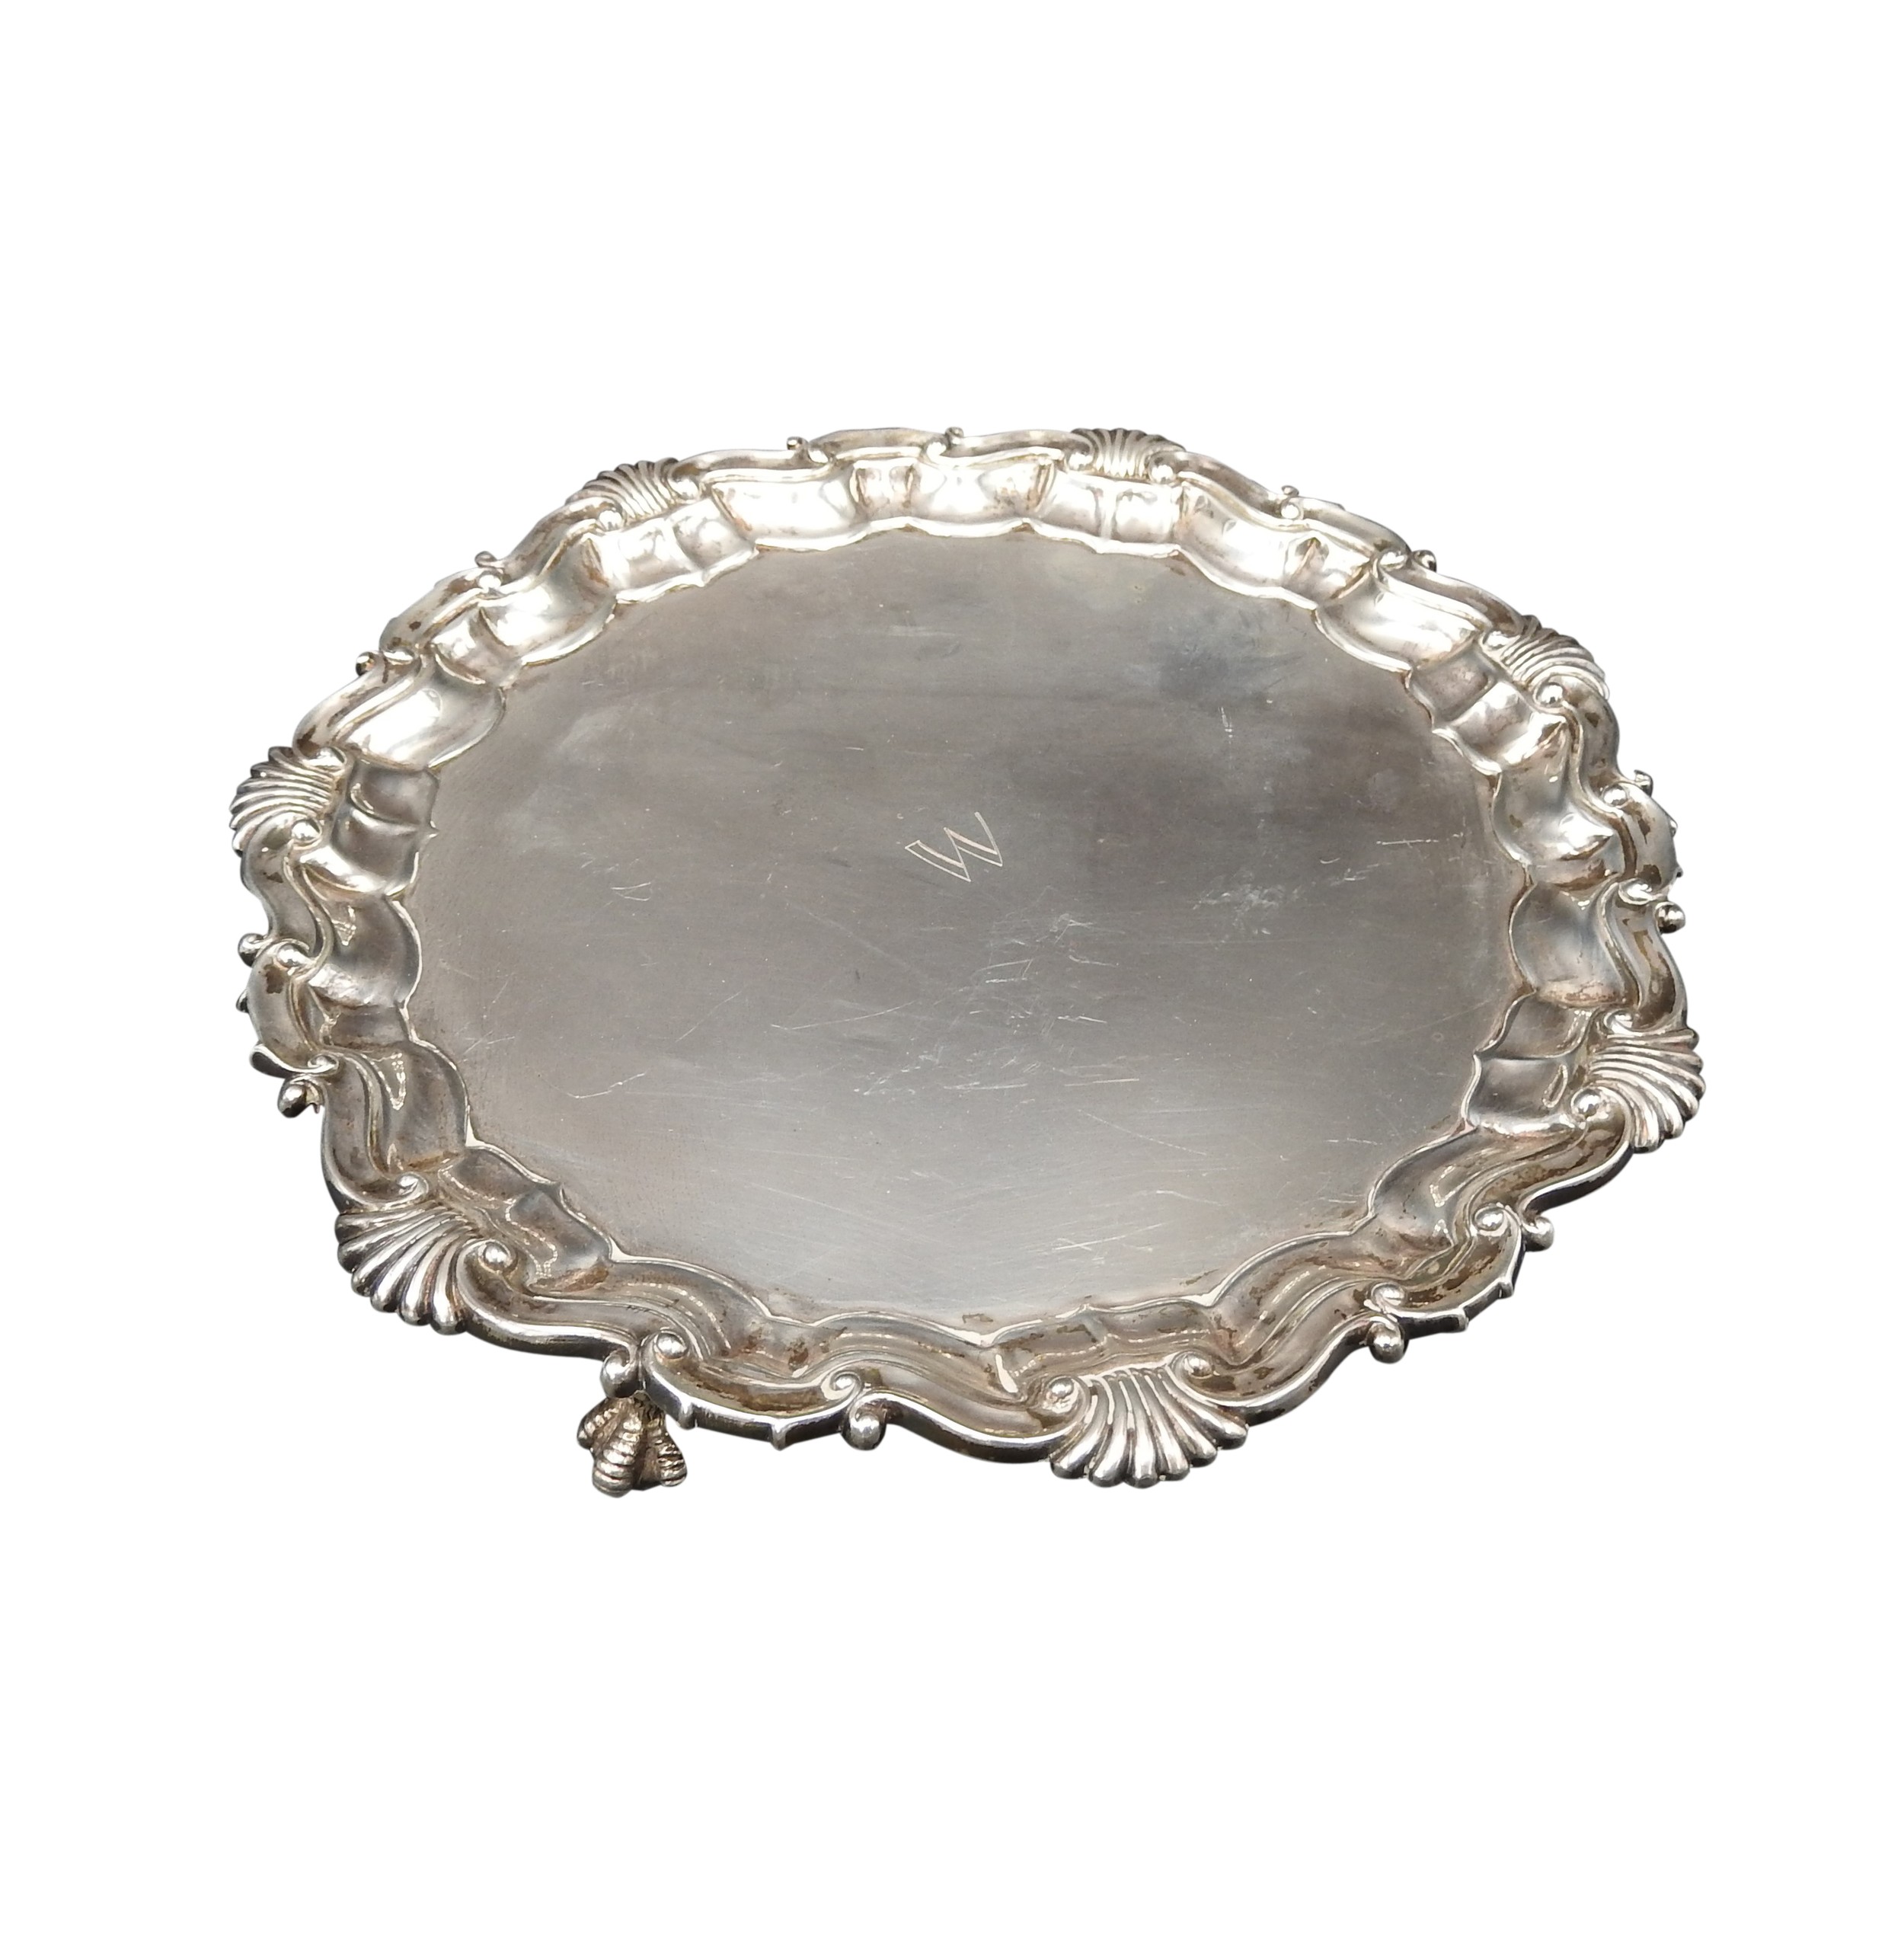 A SILVER SALVER, with Acanthus shell-scroll border, on three claw feet, London 1889, maker's stamp